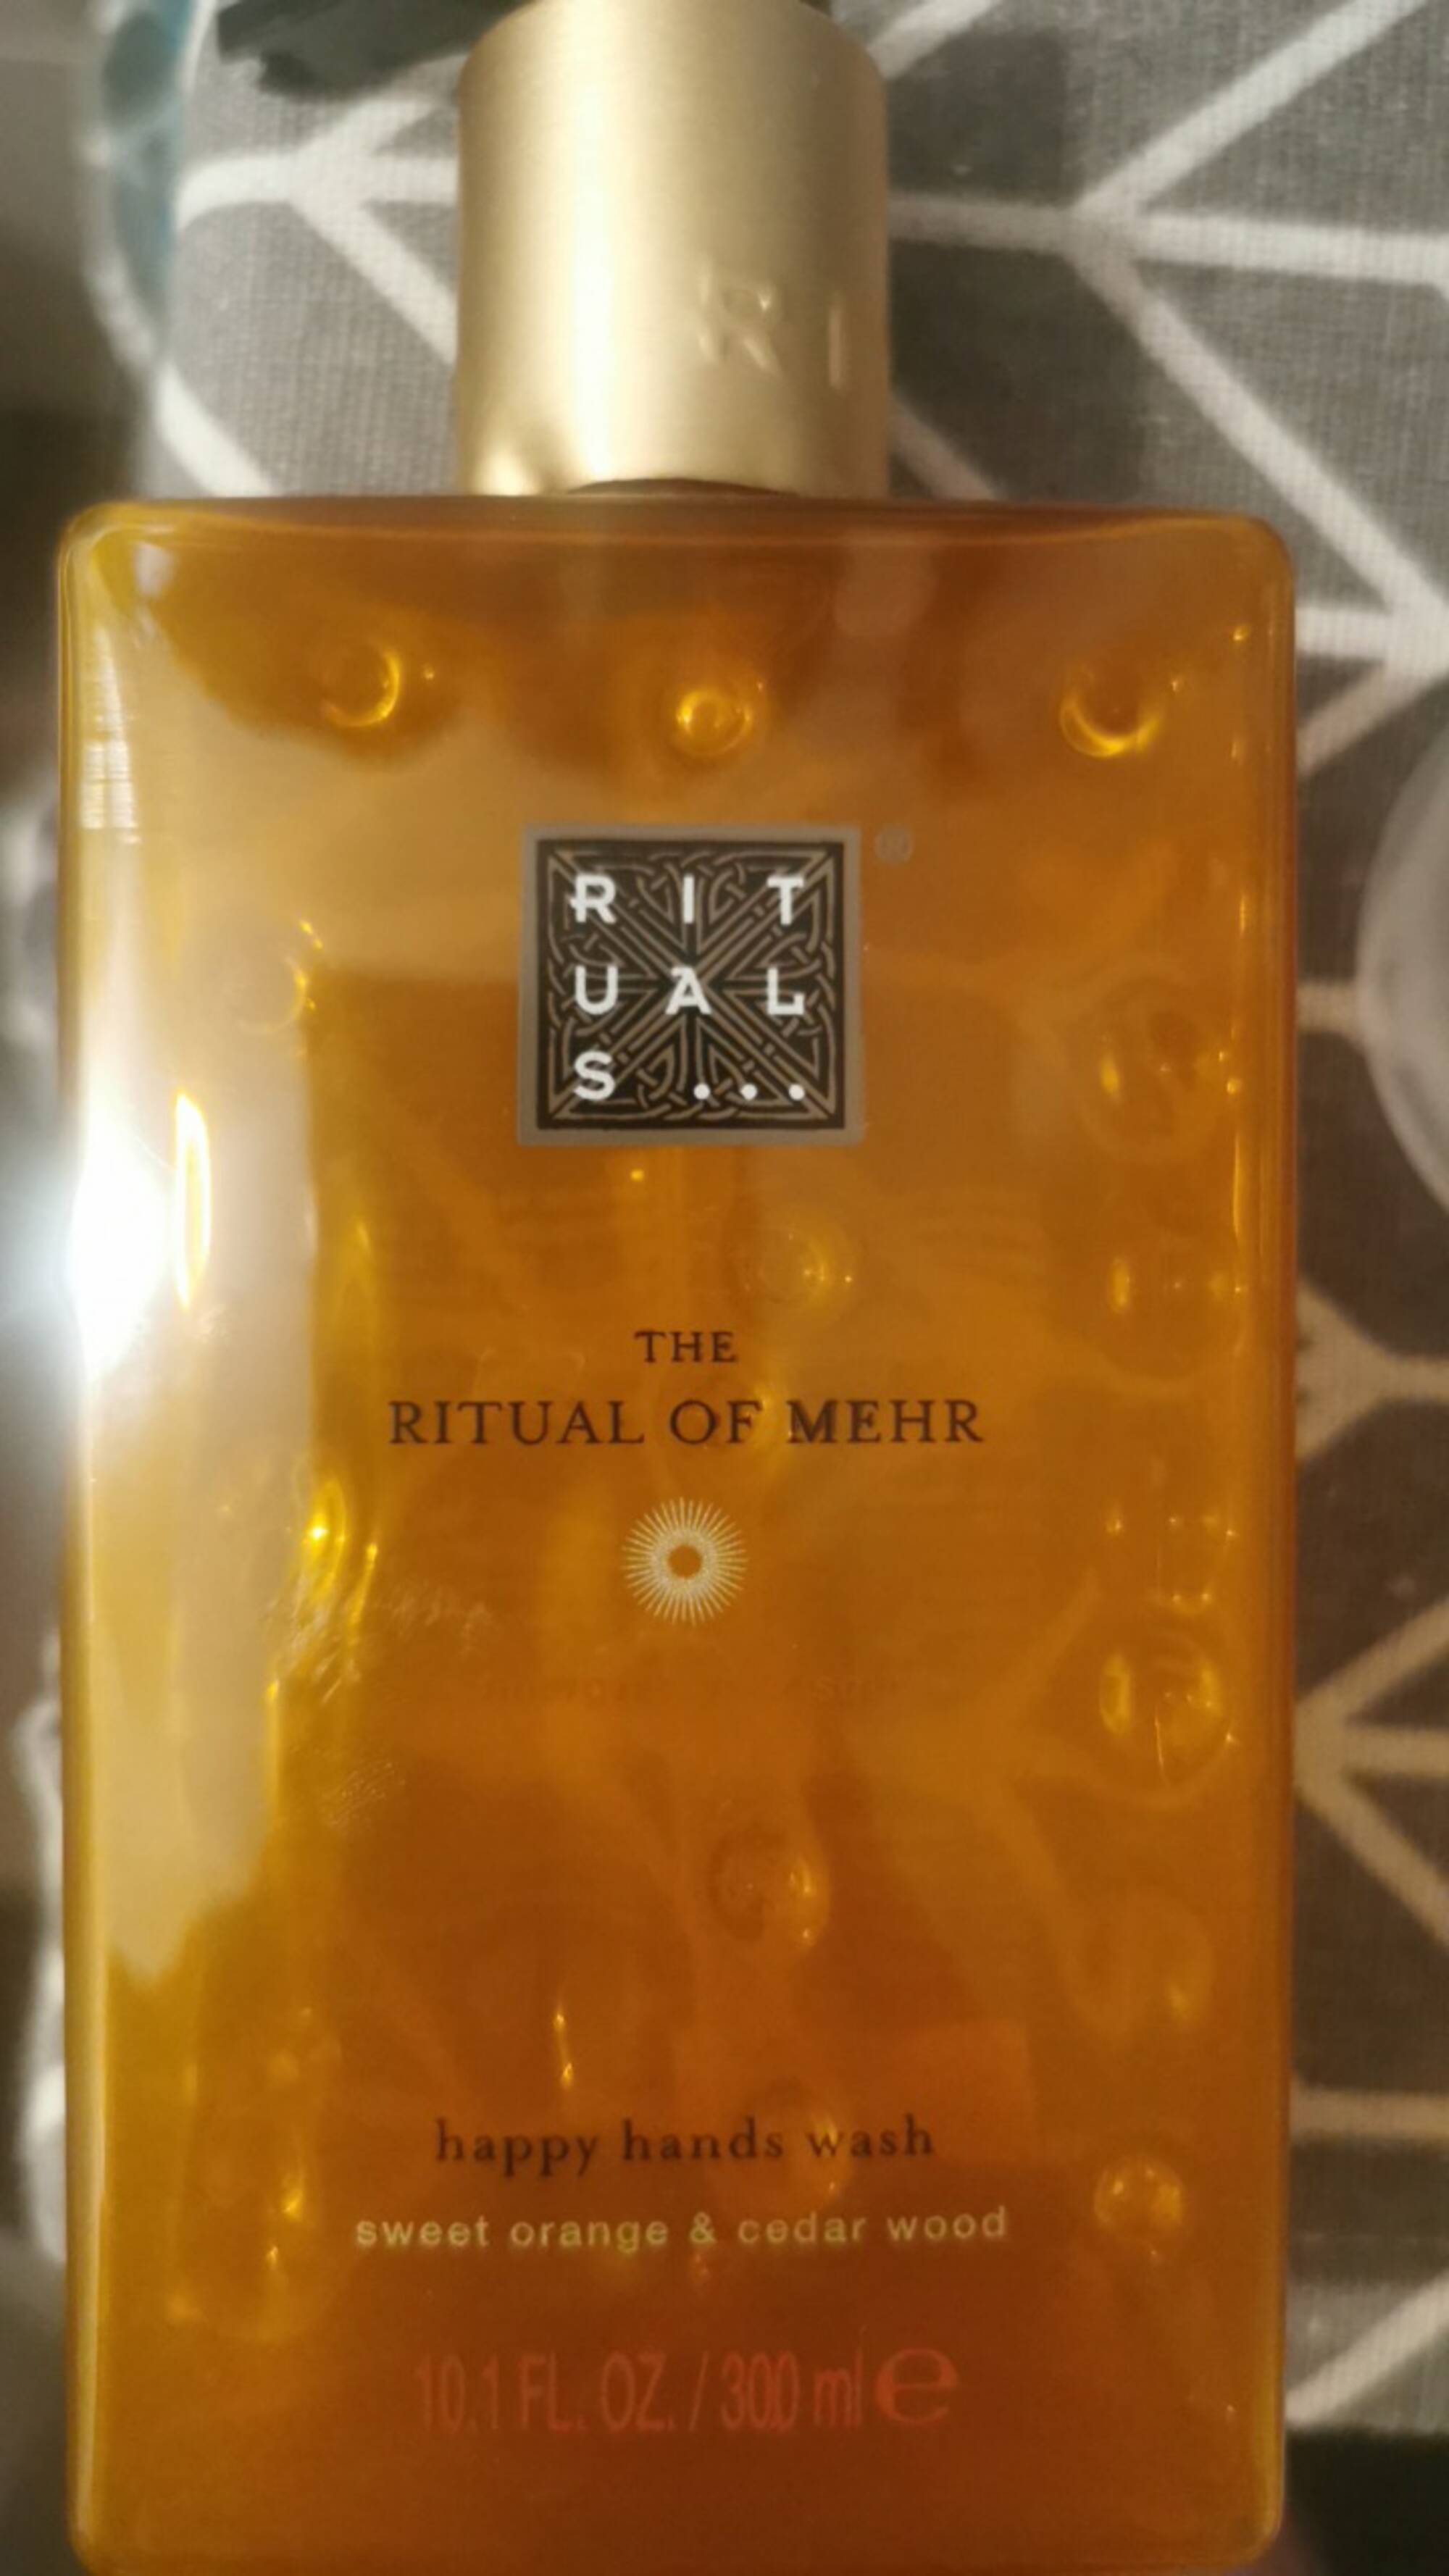 RITUALS - The ritual of mehr - Happy hands wash